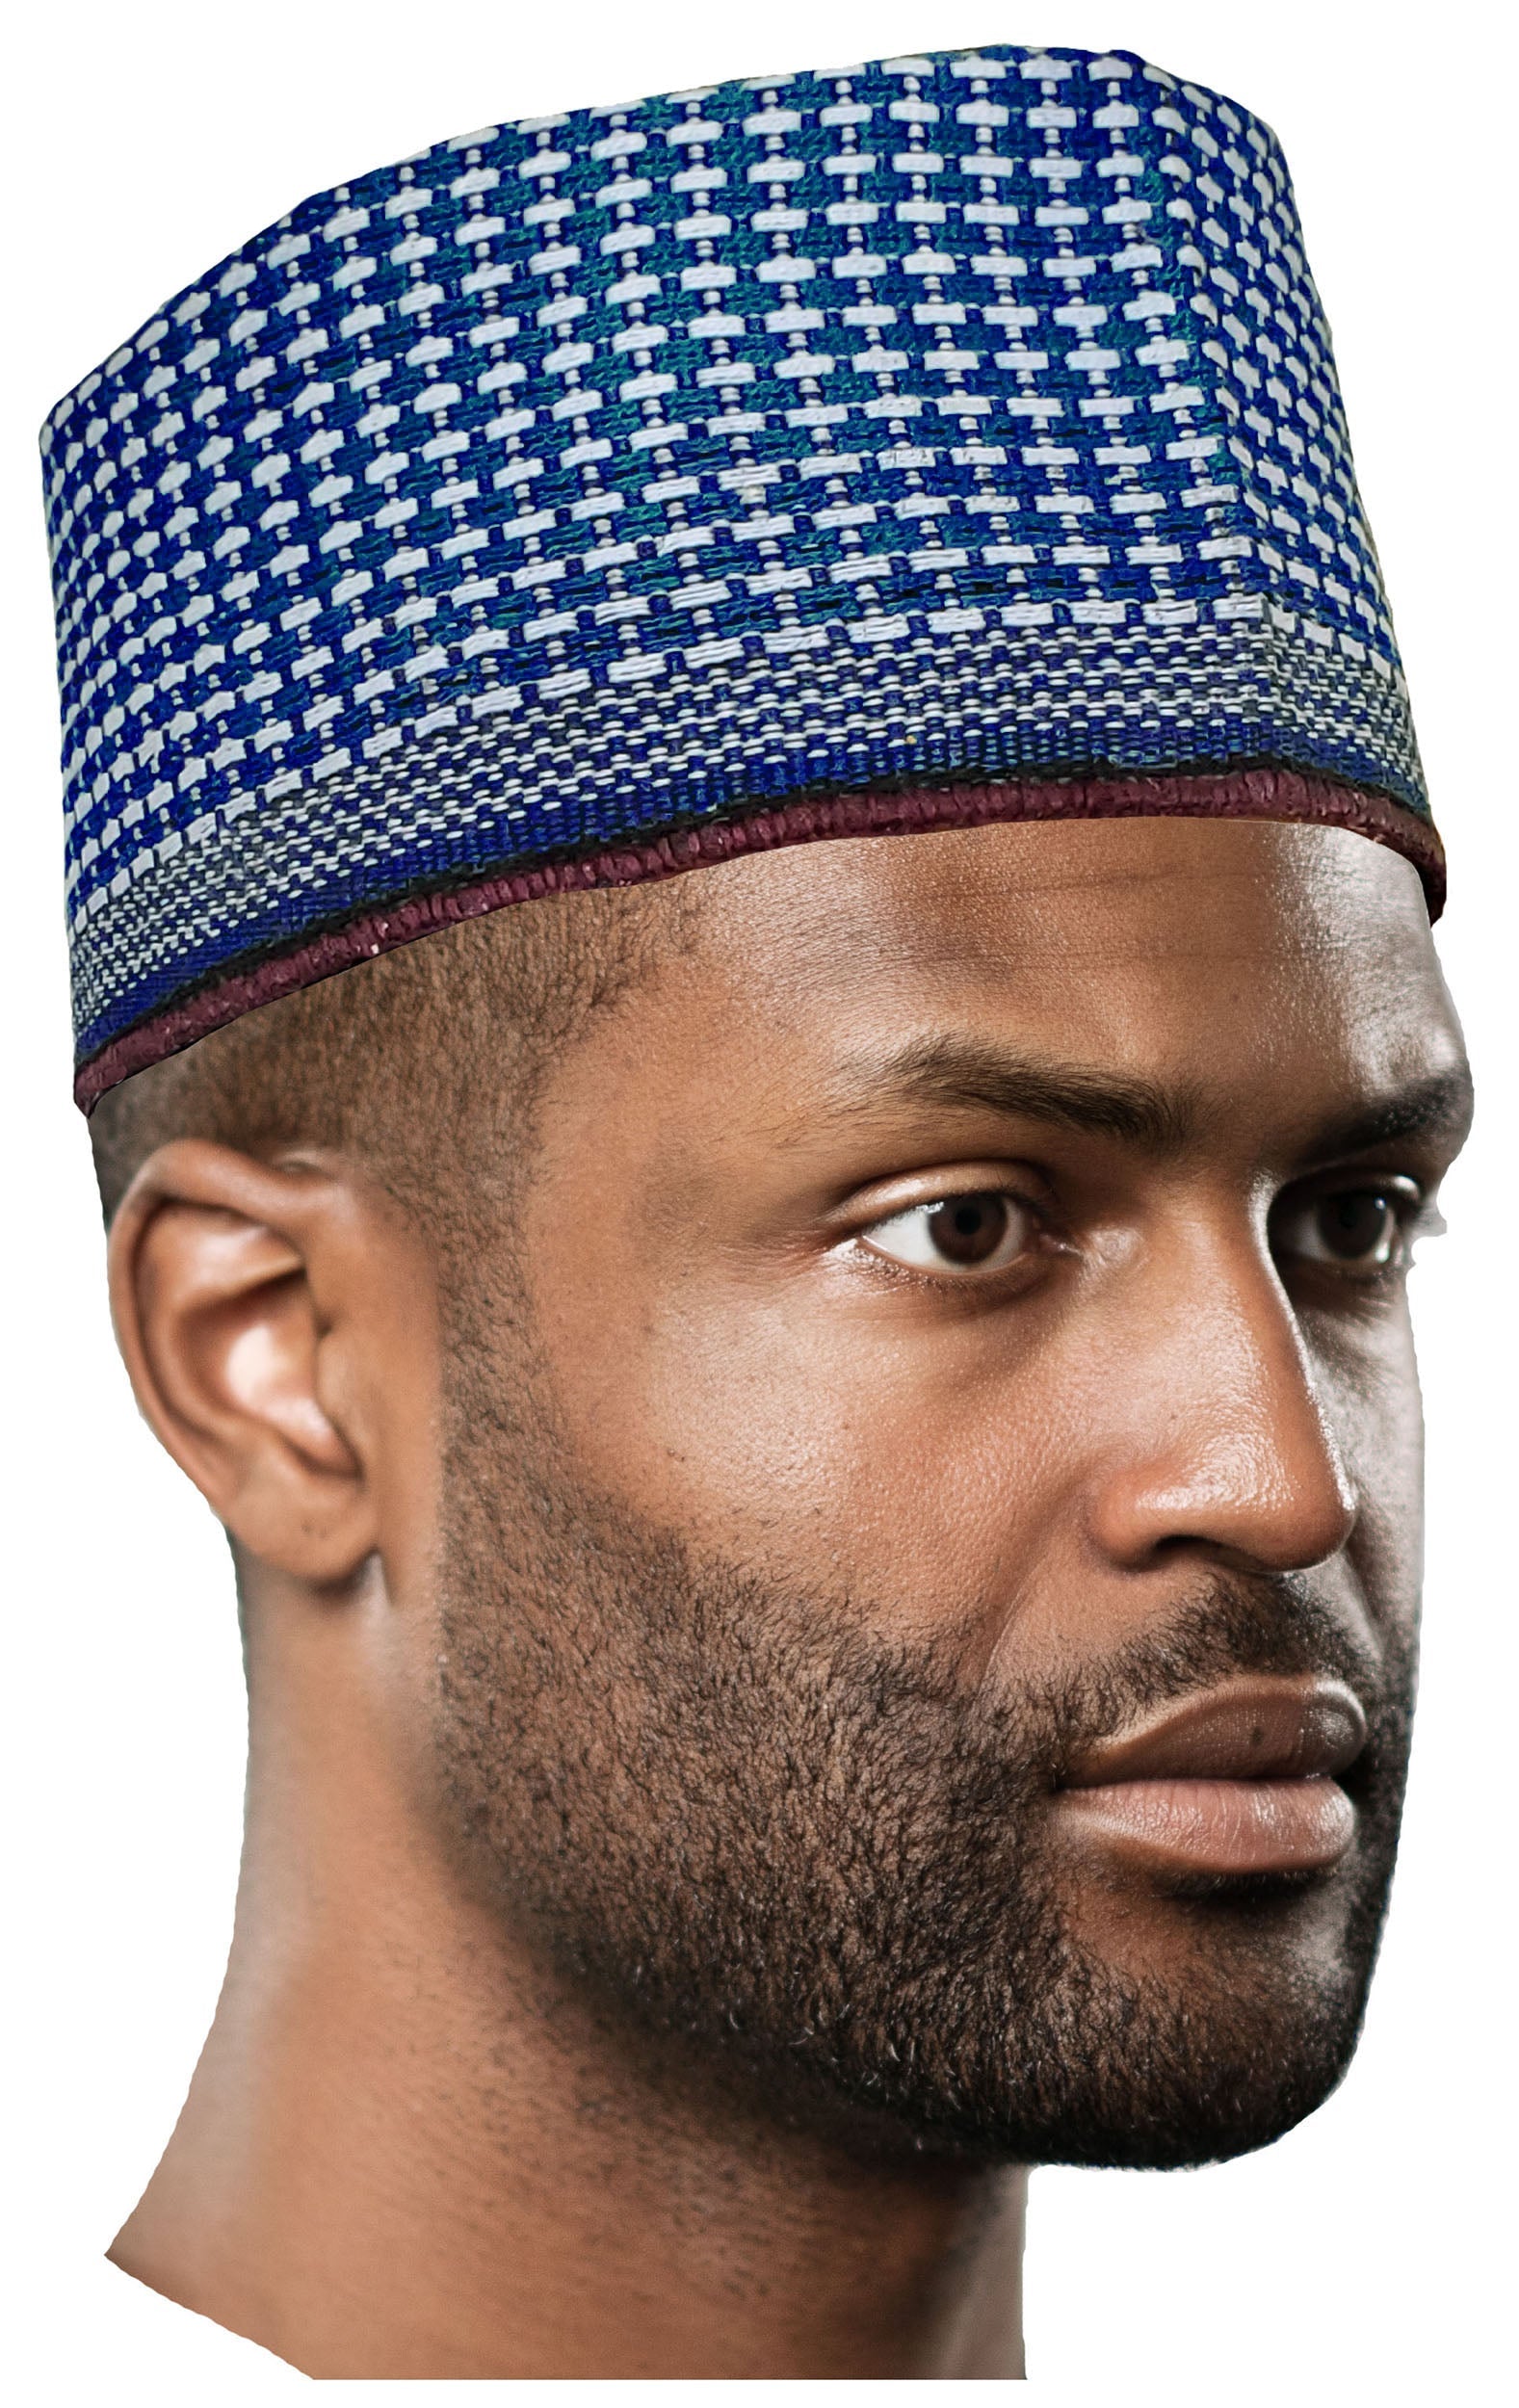 Hassan Blue and White Hausa Mallam Cap Fulani Hula Hand-Crafted African Traditional Kufi hat DPH627